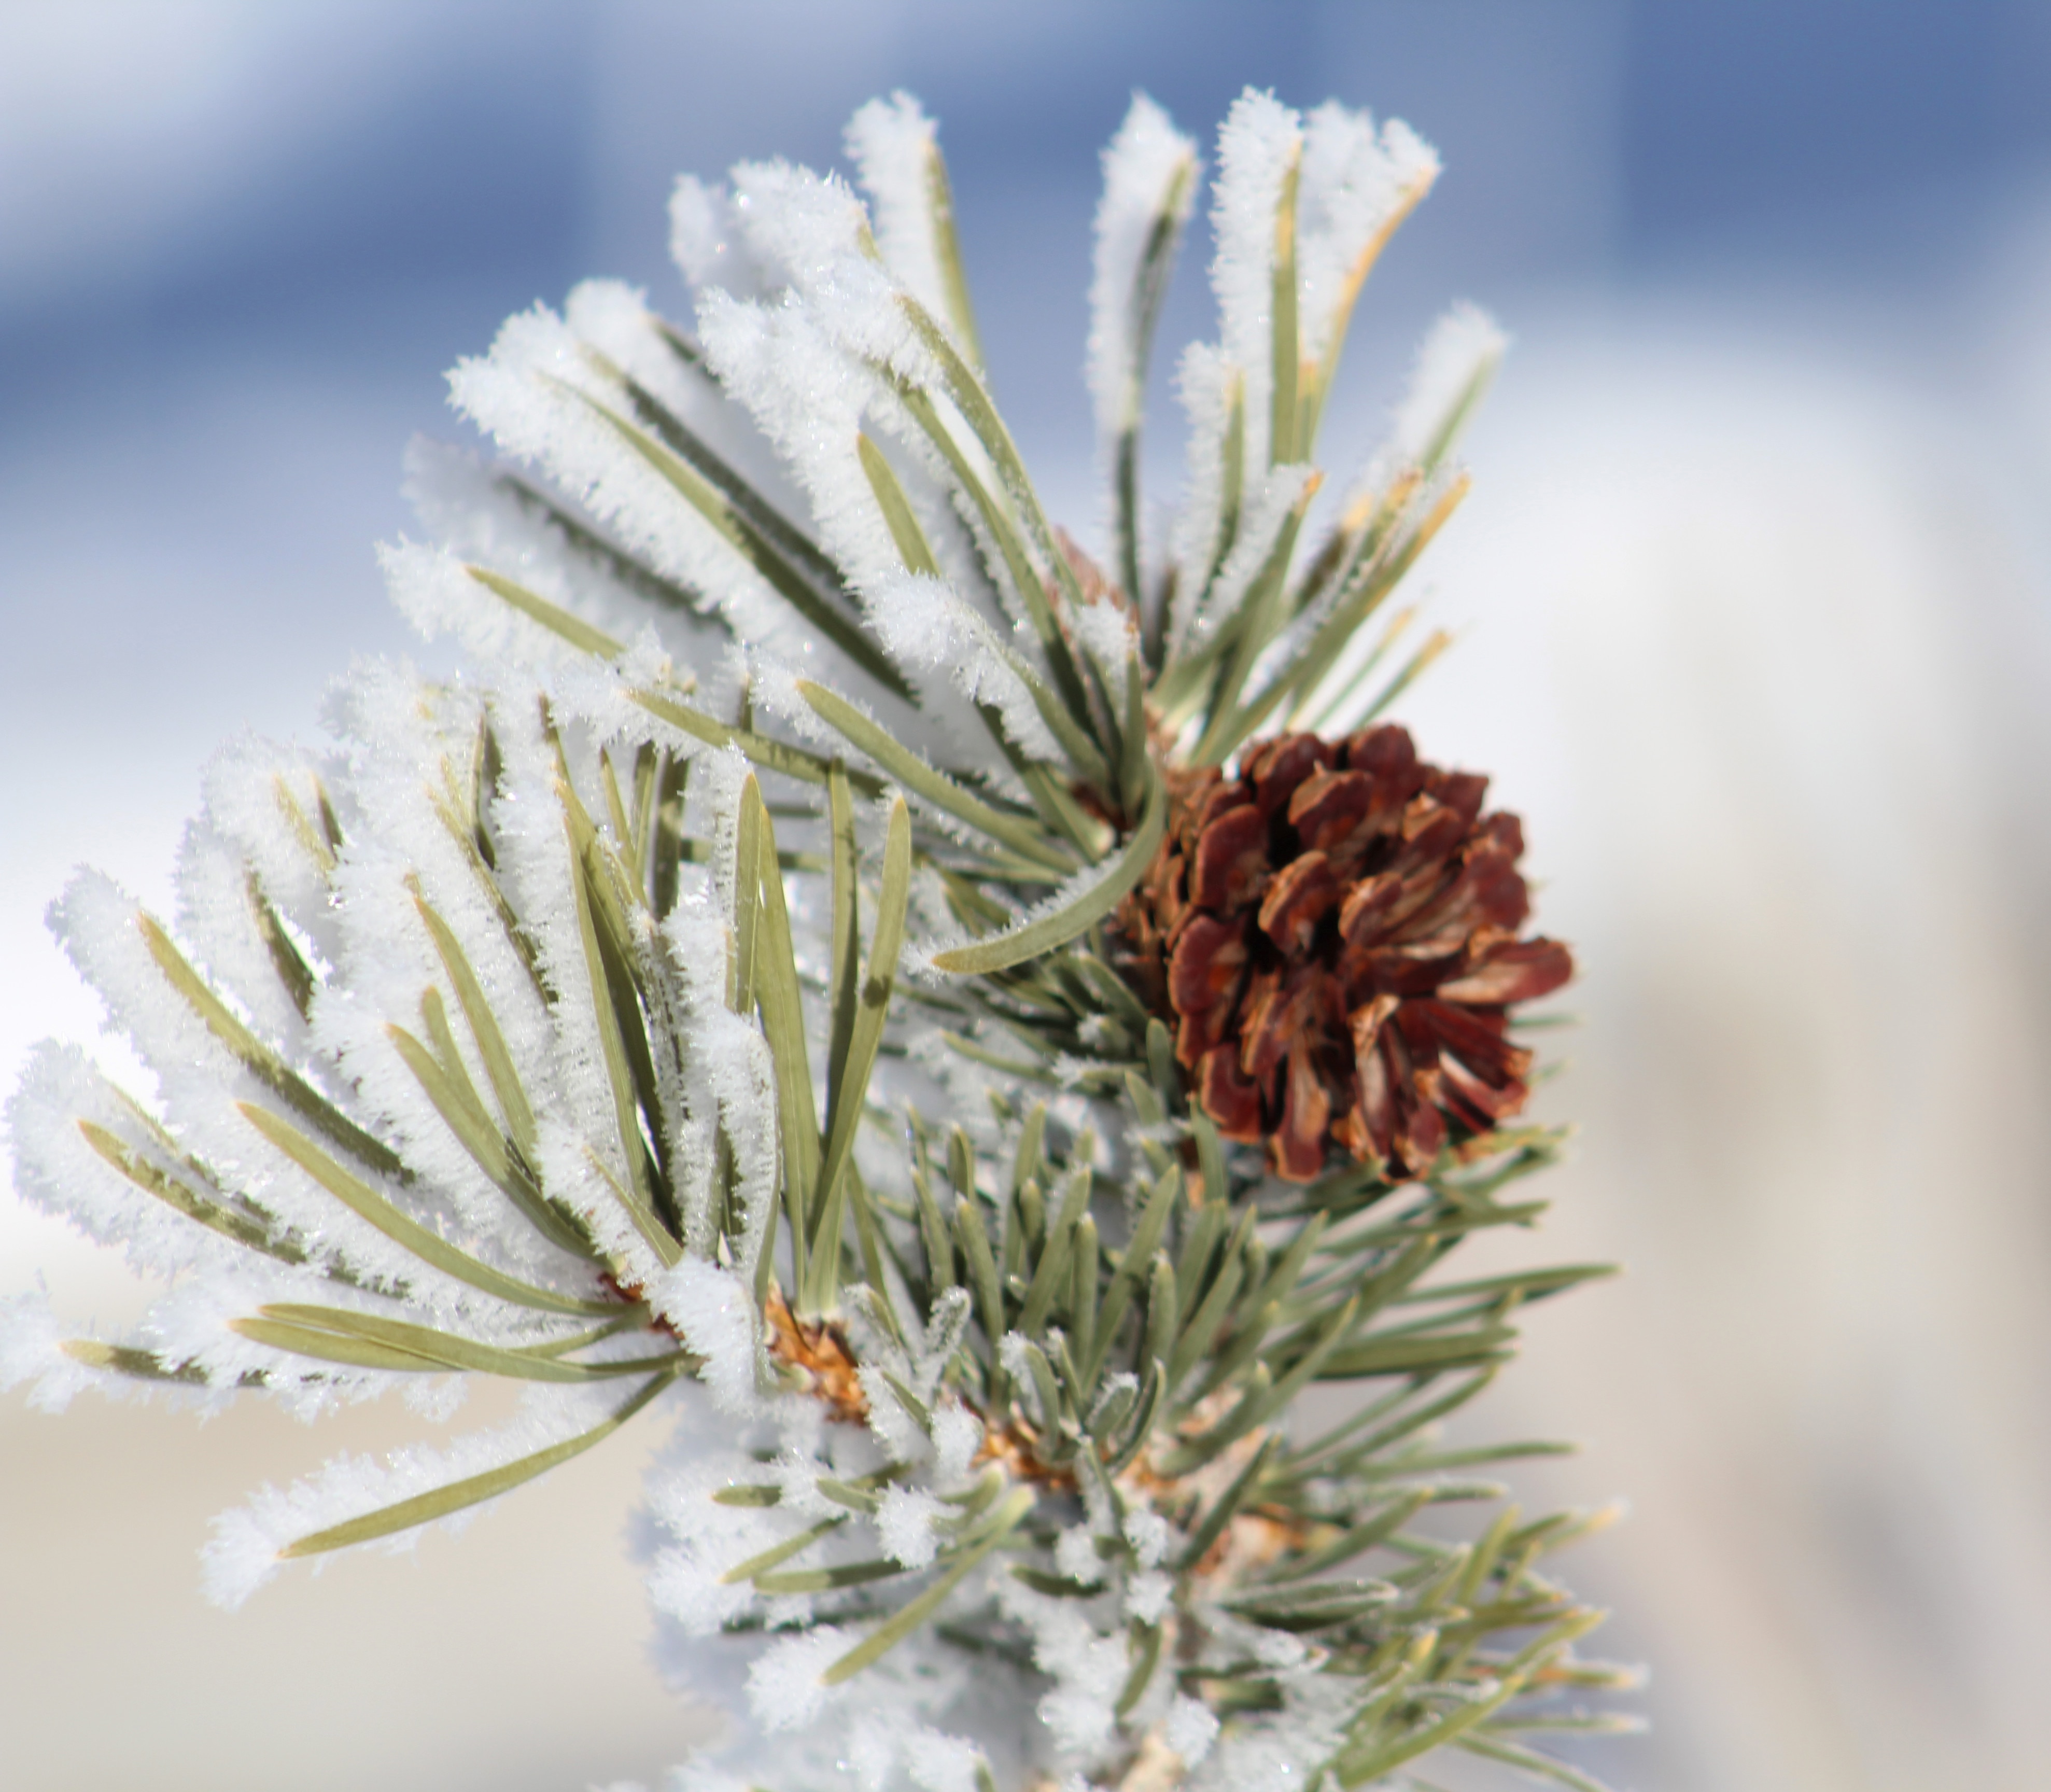 close up photo of snow covered pine needles with pine cone durign daytime